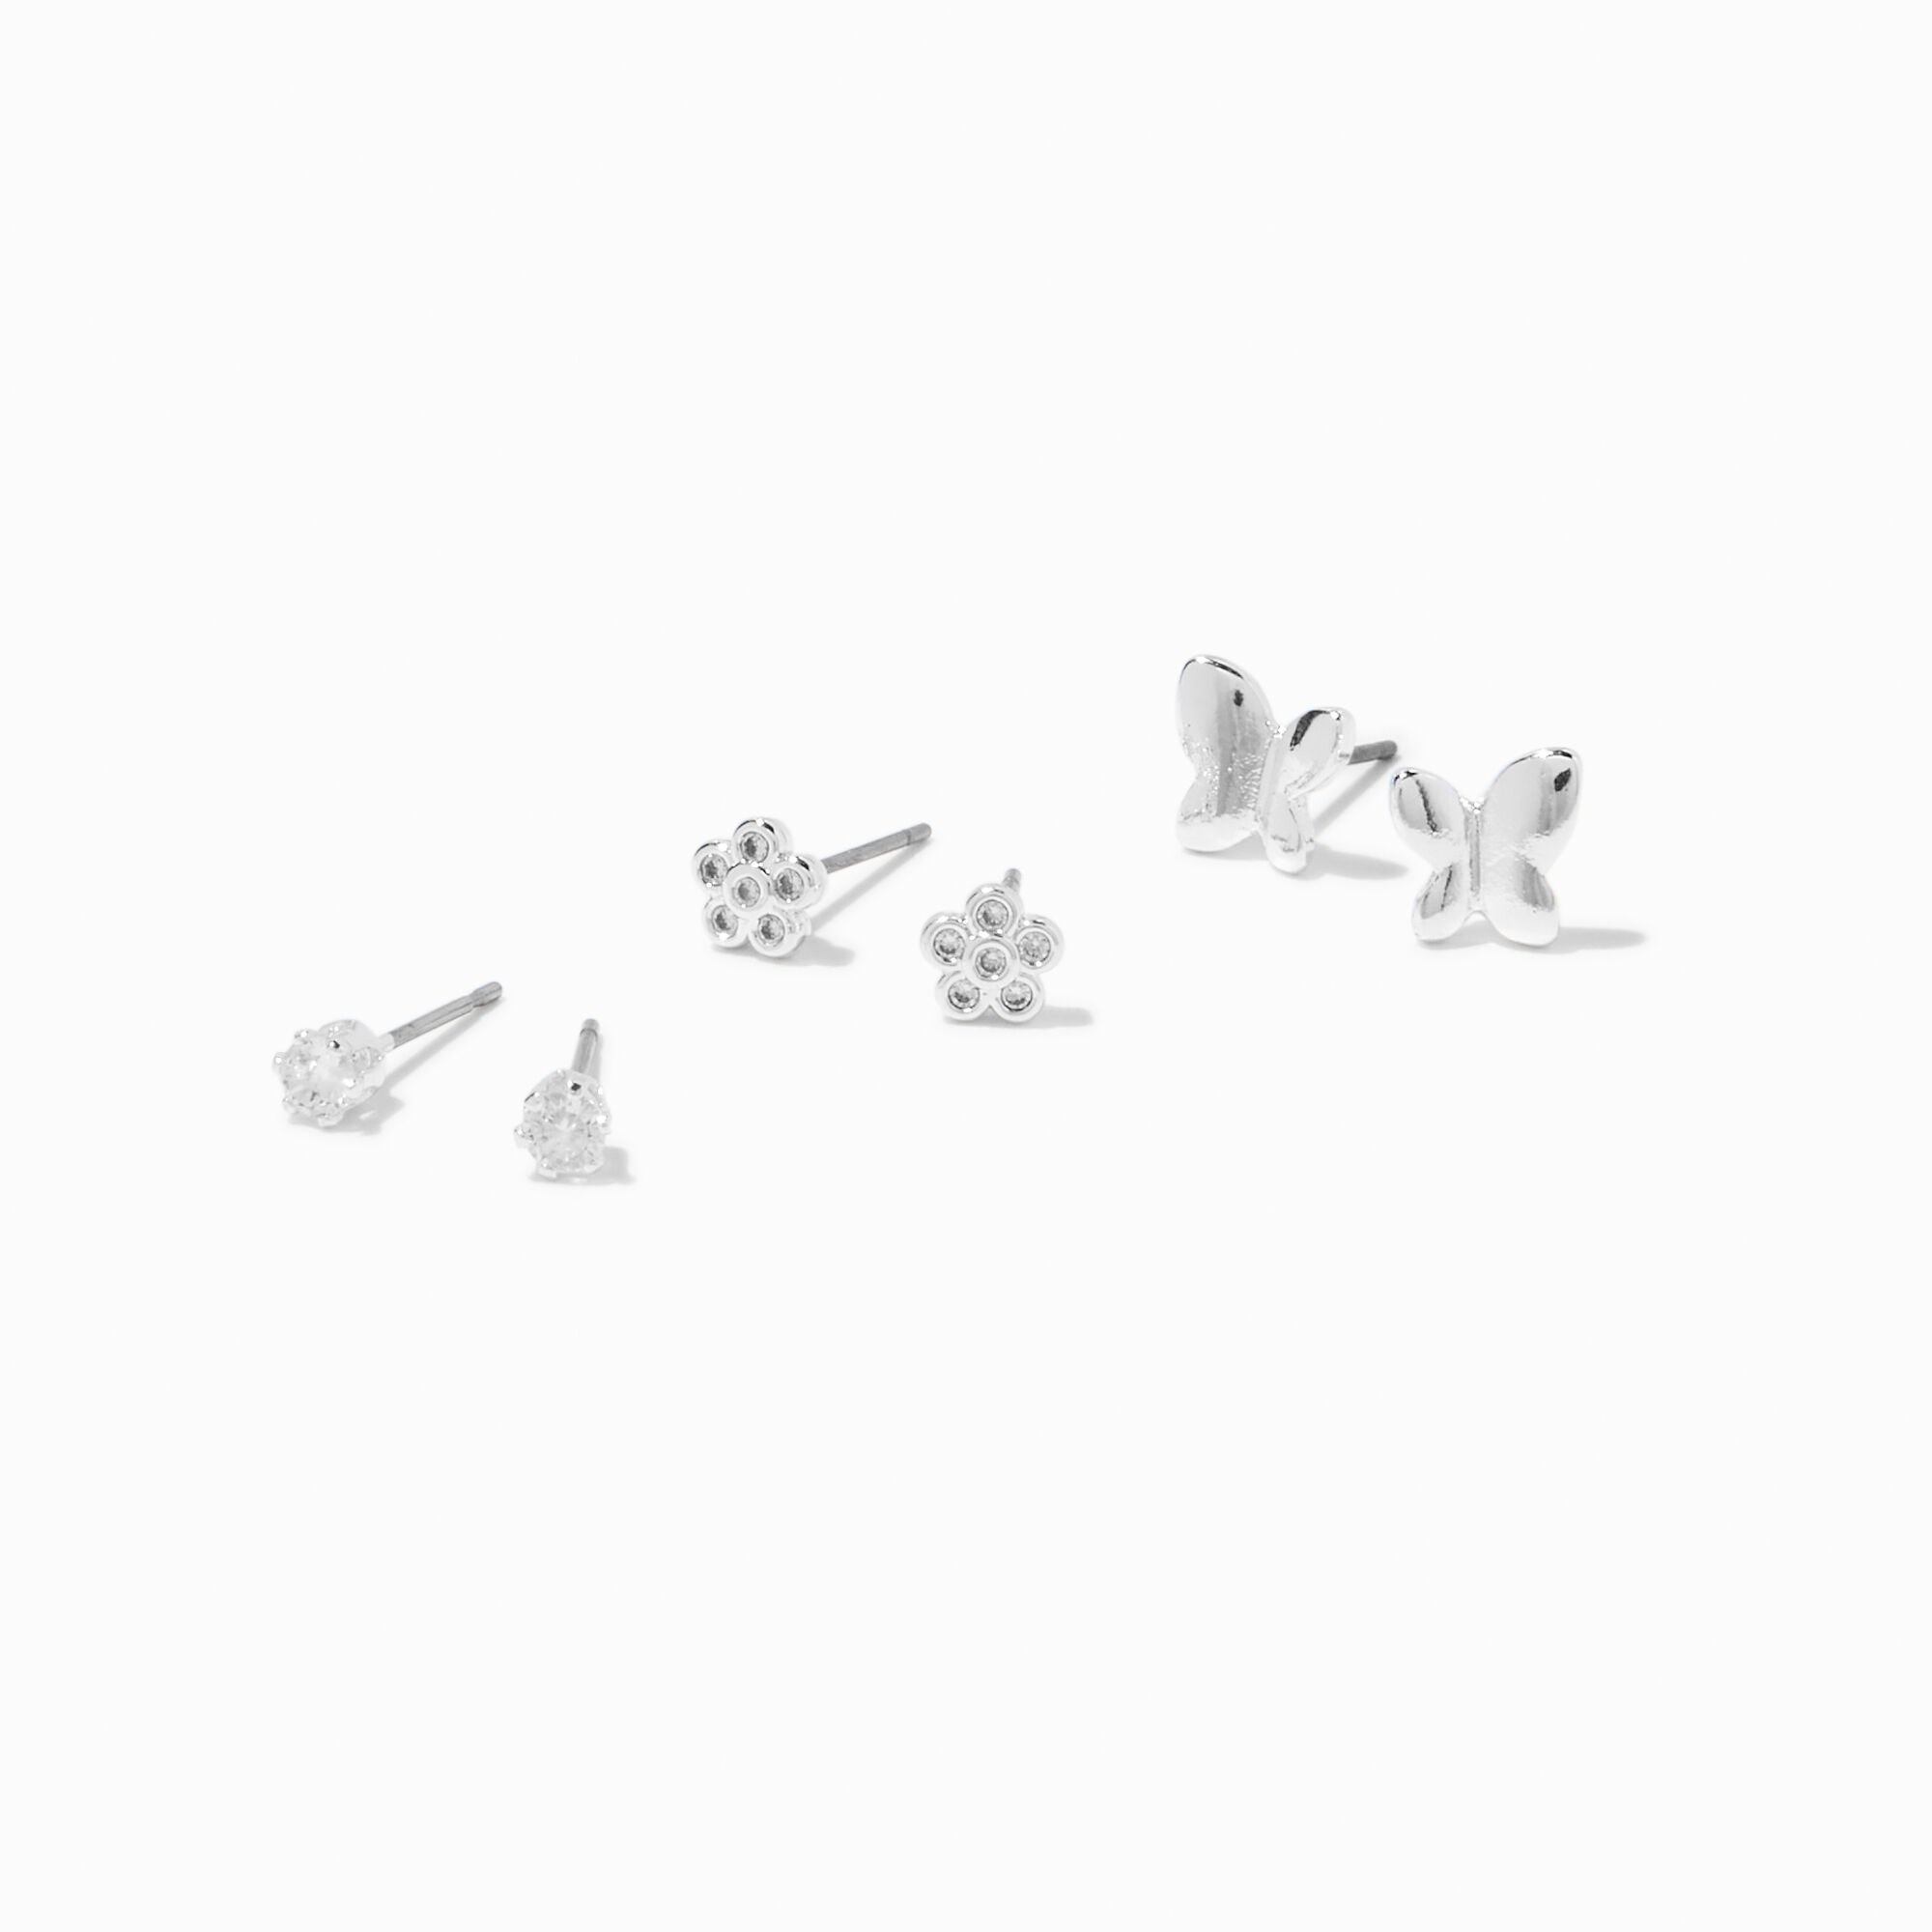 View Claires Tone Cubic Zirconia Flower Butterfly Stud Earrings 3 Pack Silver information